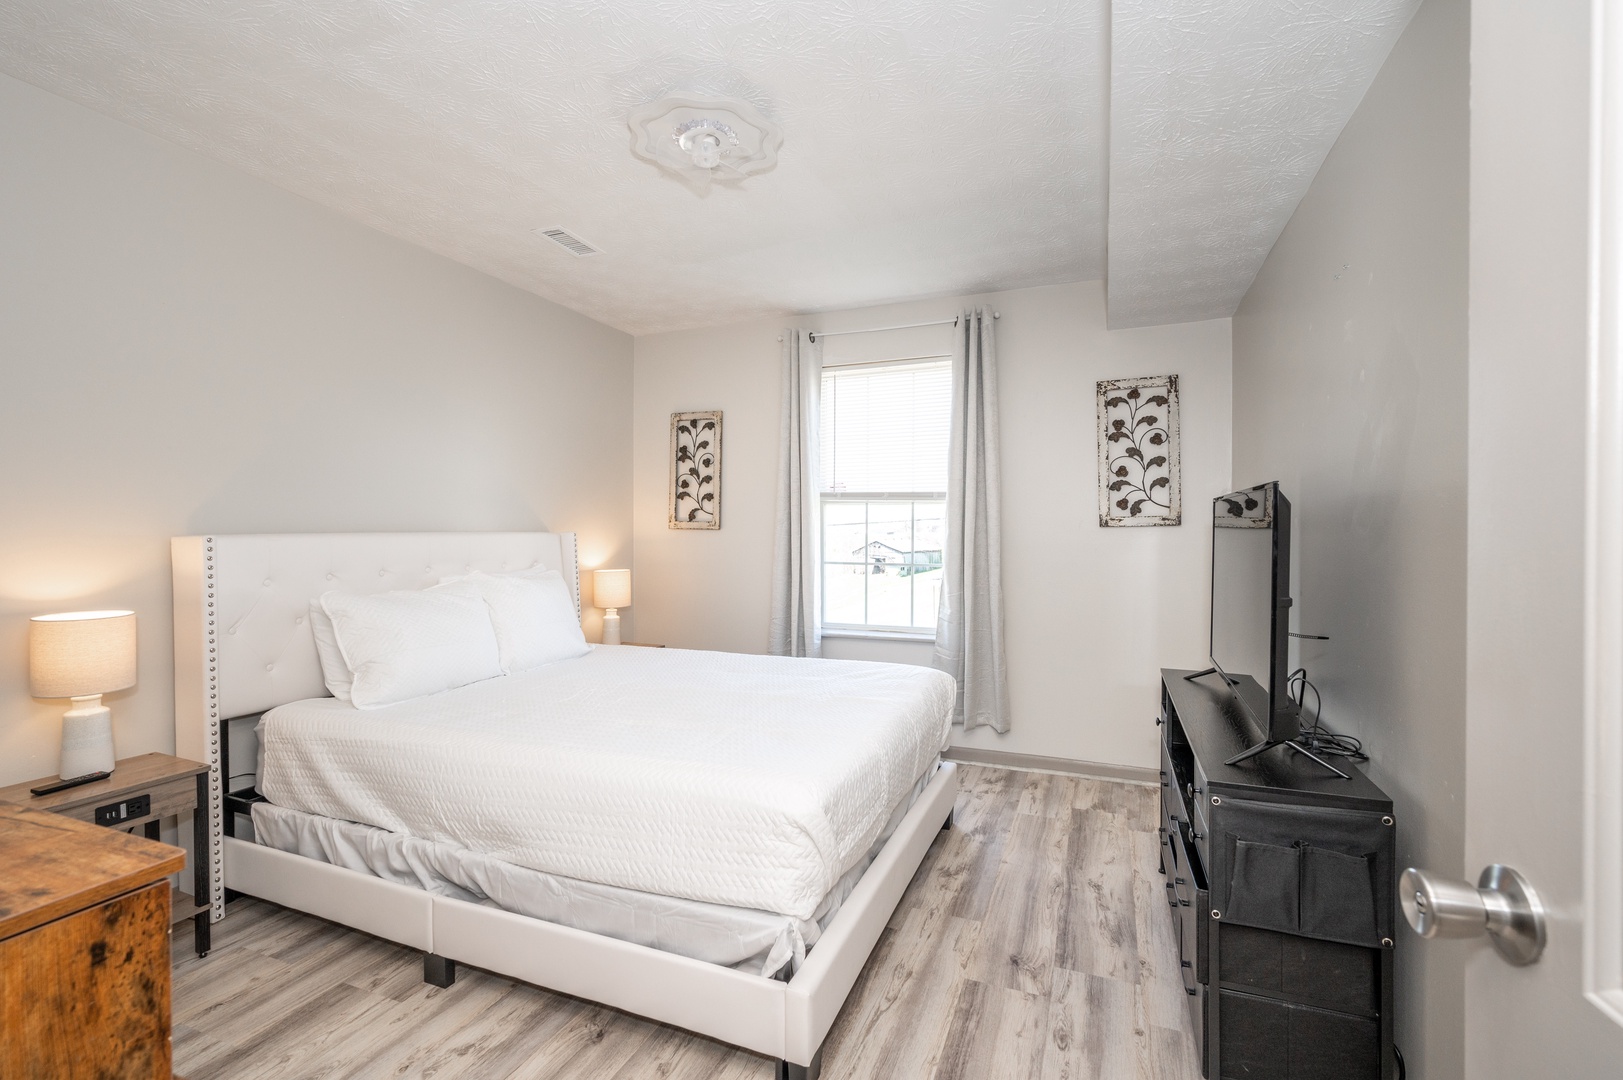 The 1st of 2 bedrooms in Apartment 2 boasts a plush queen bed & Smart TV